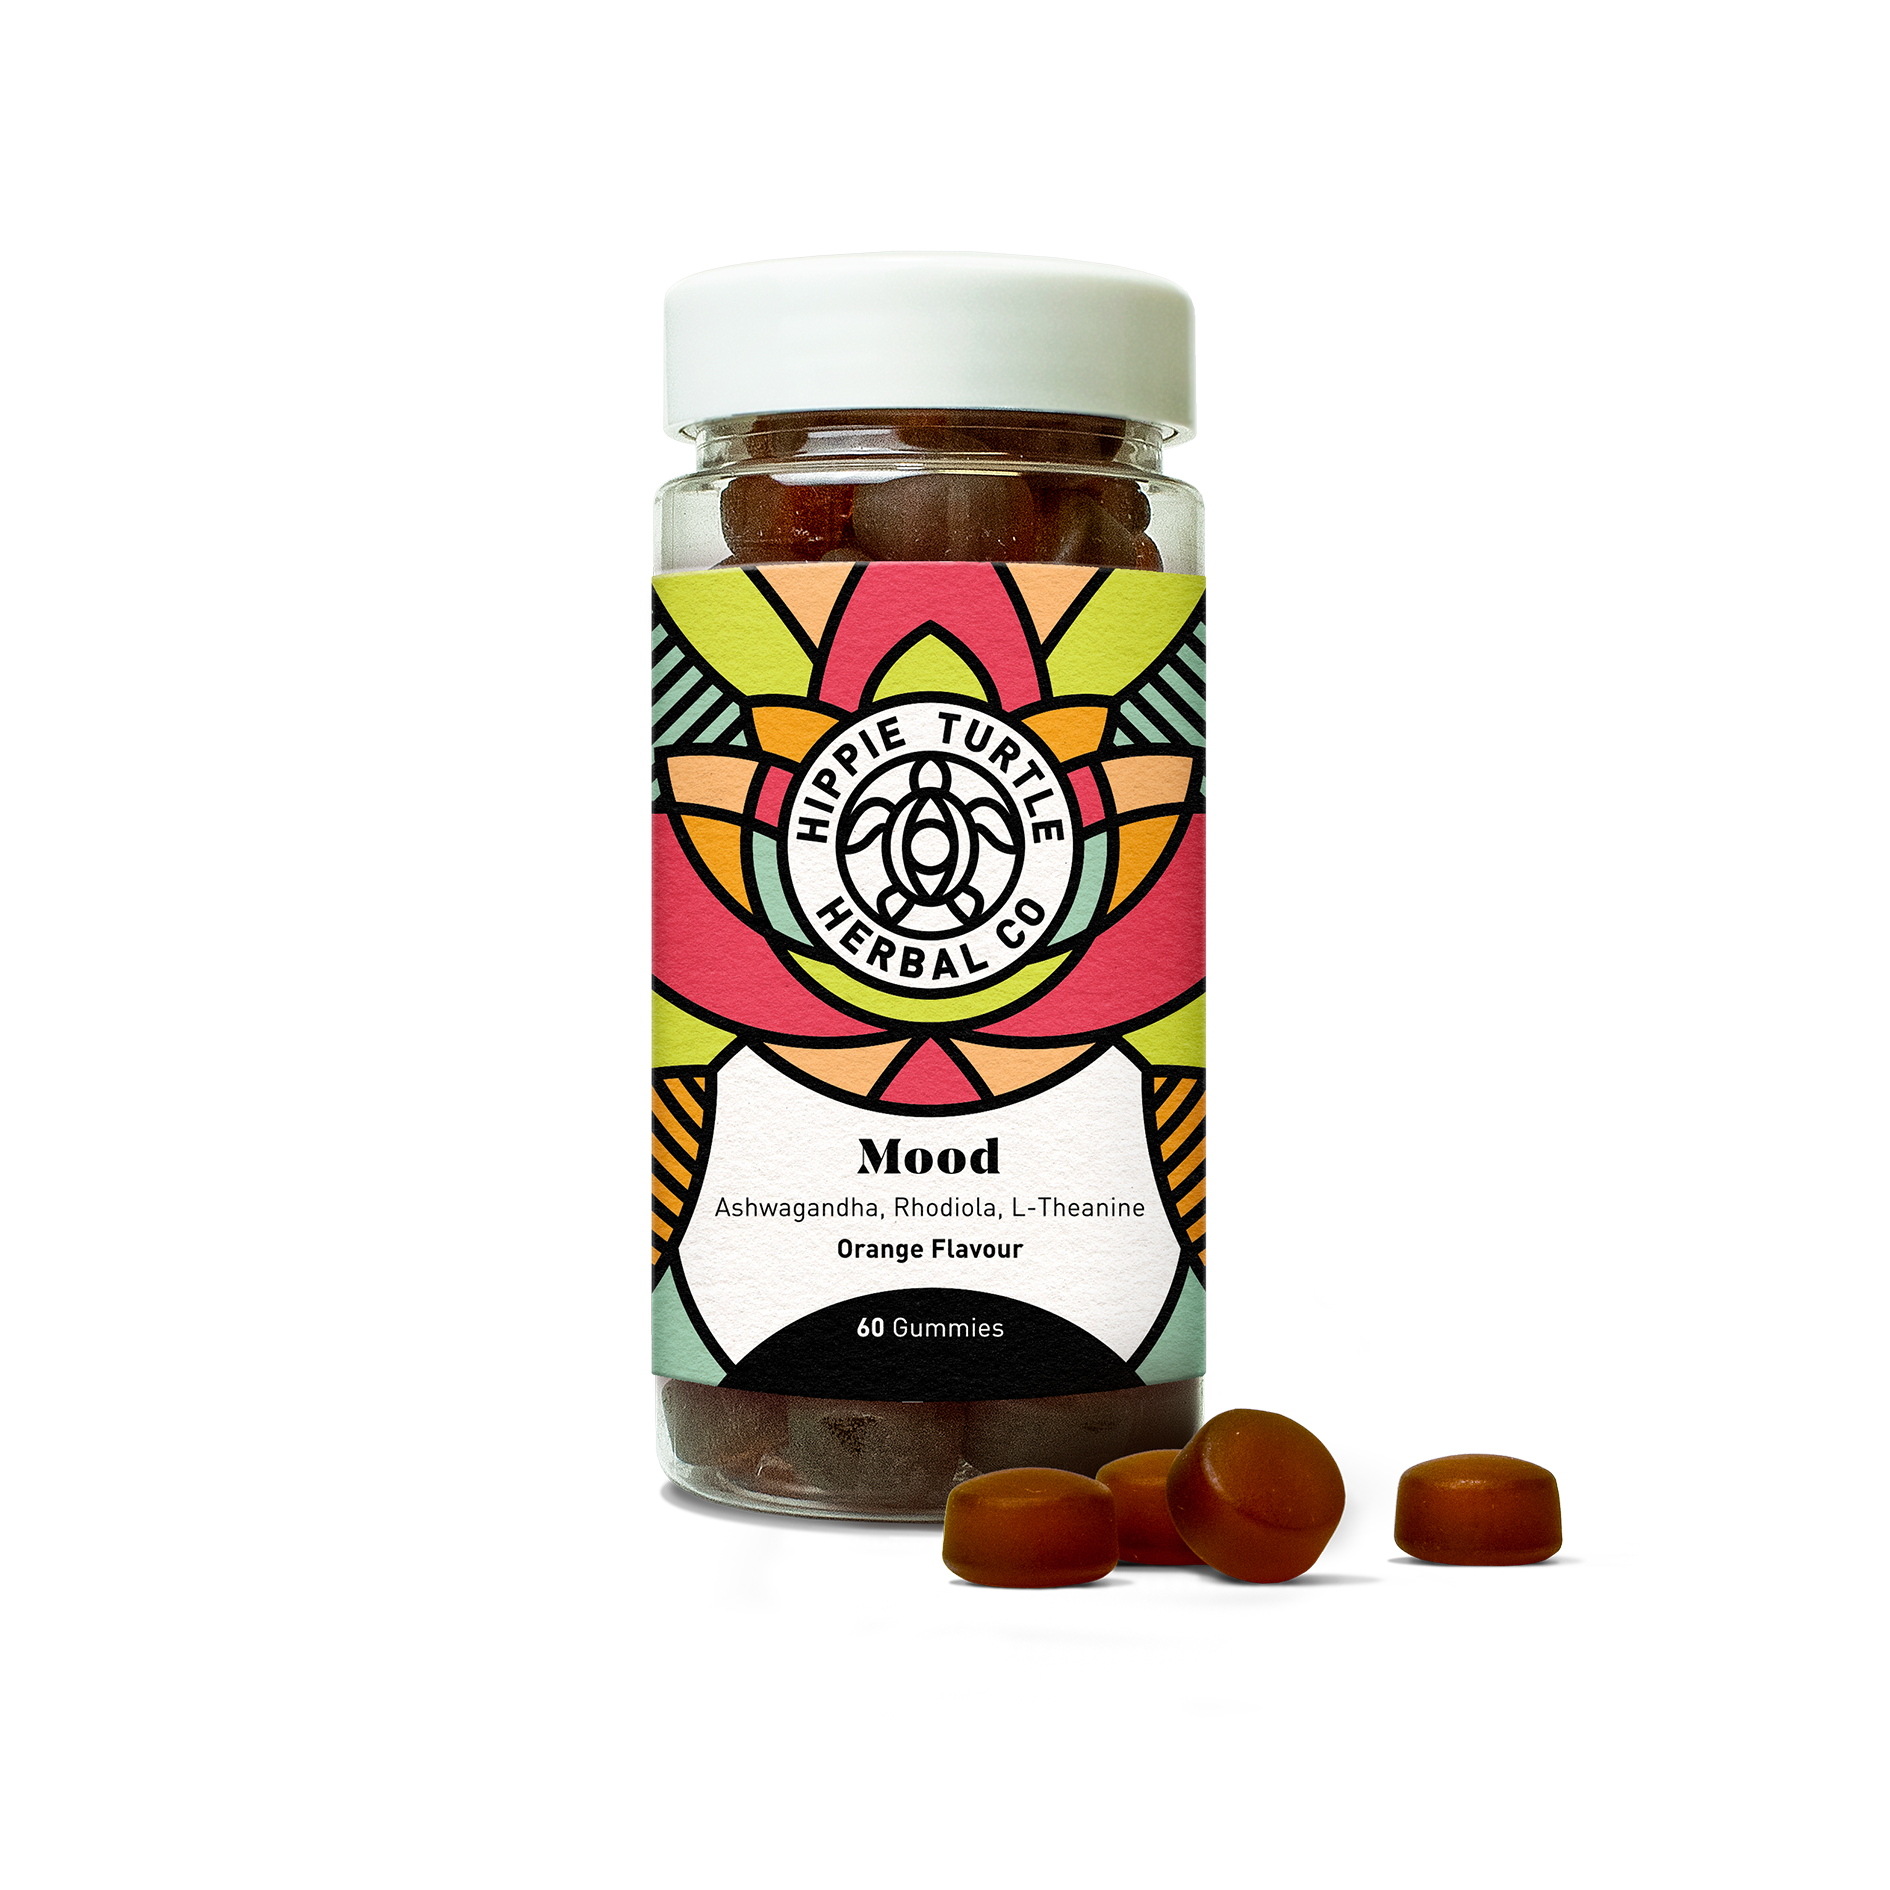 Hippie Turtle Herbal Co Mood gummies with chewable ashwagandha, l theanine, rhodiola and b vitamins to help stress and anxiety